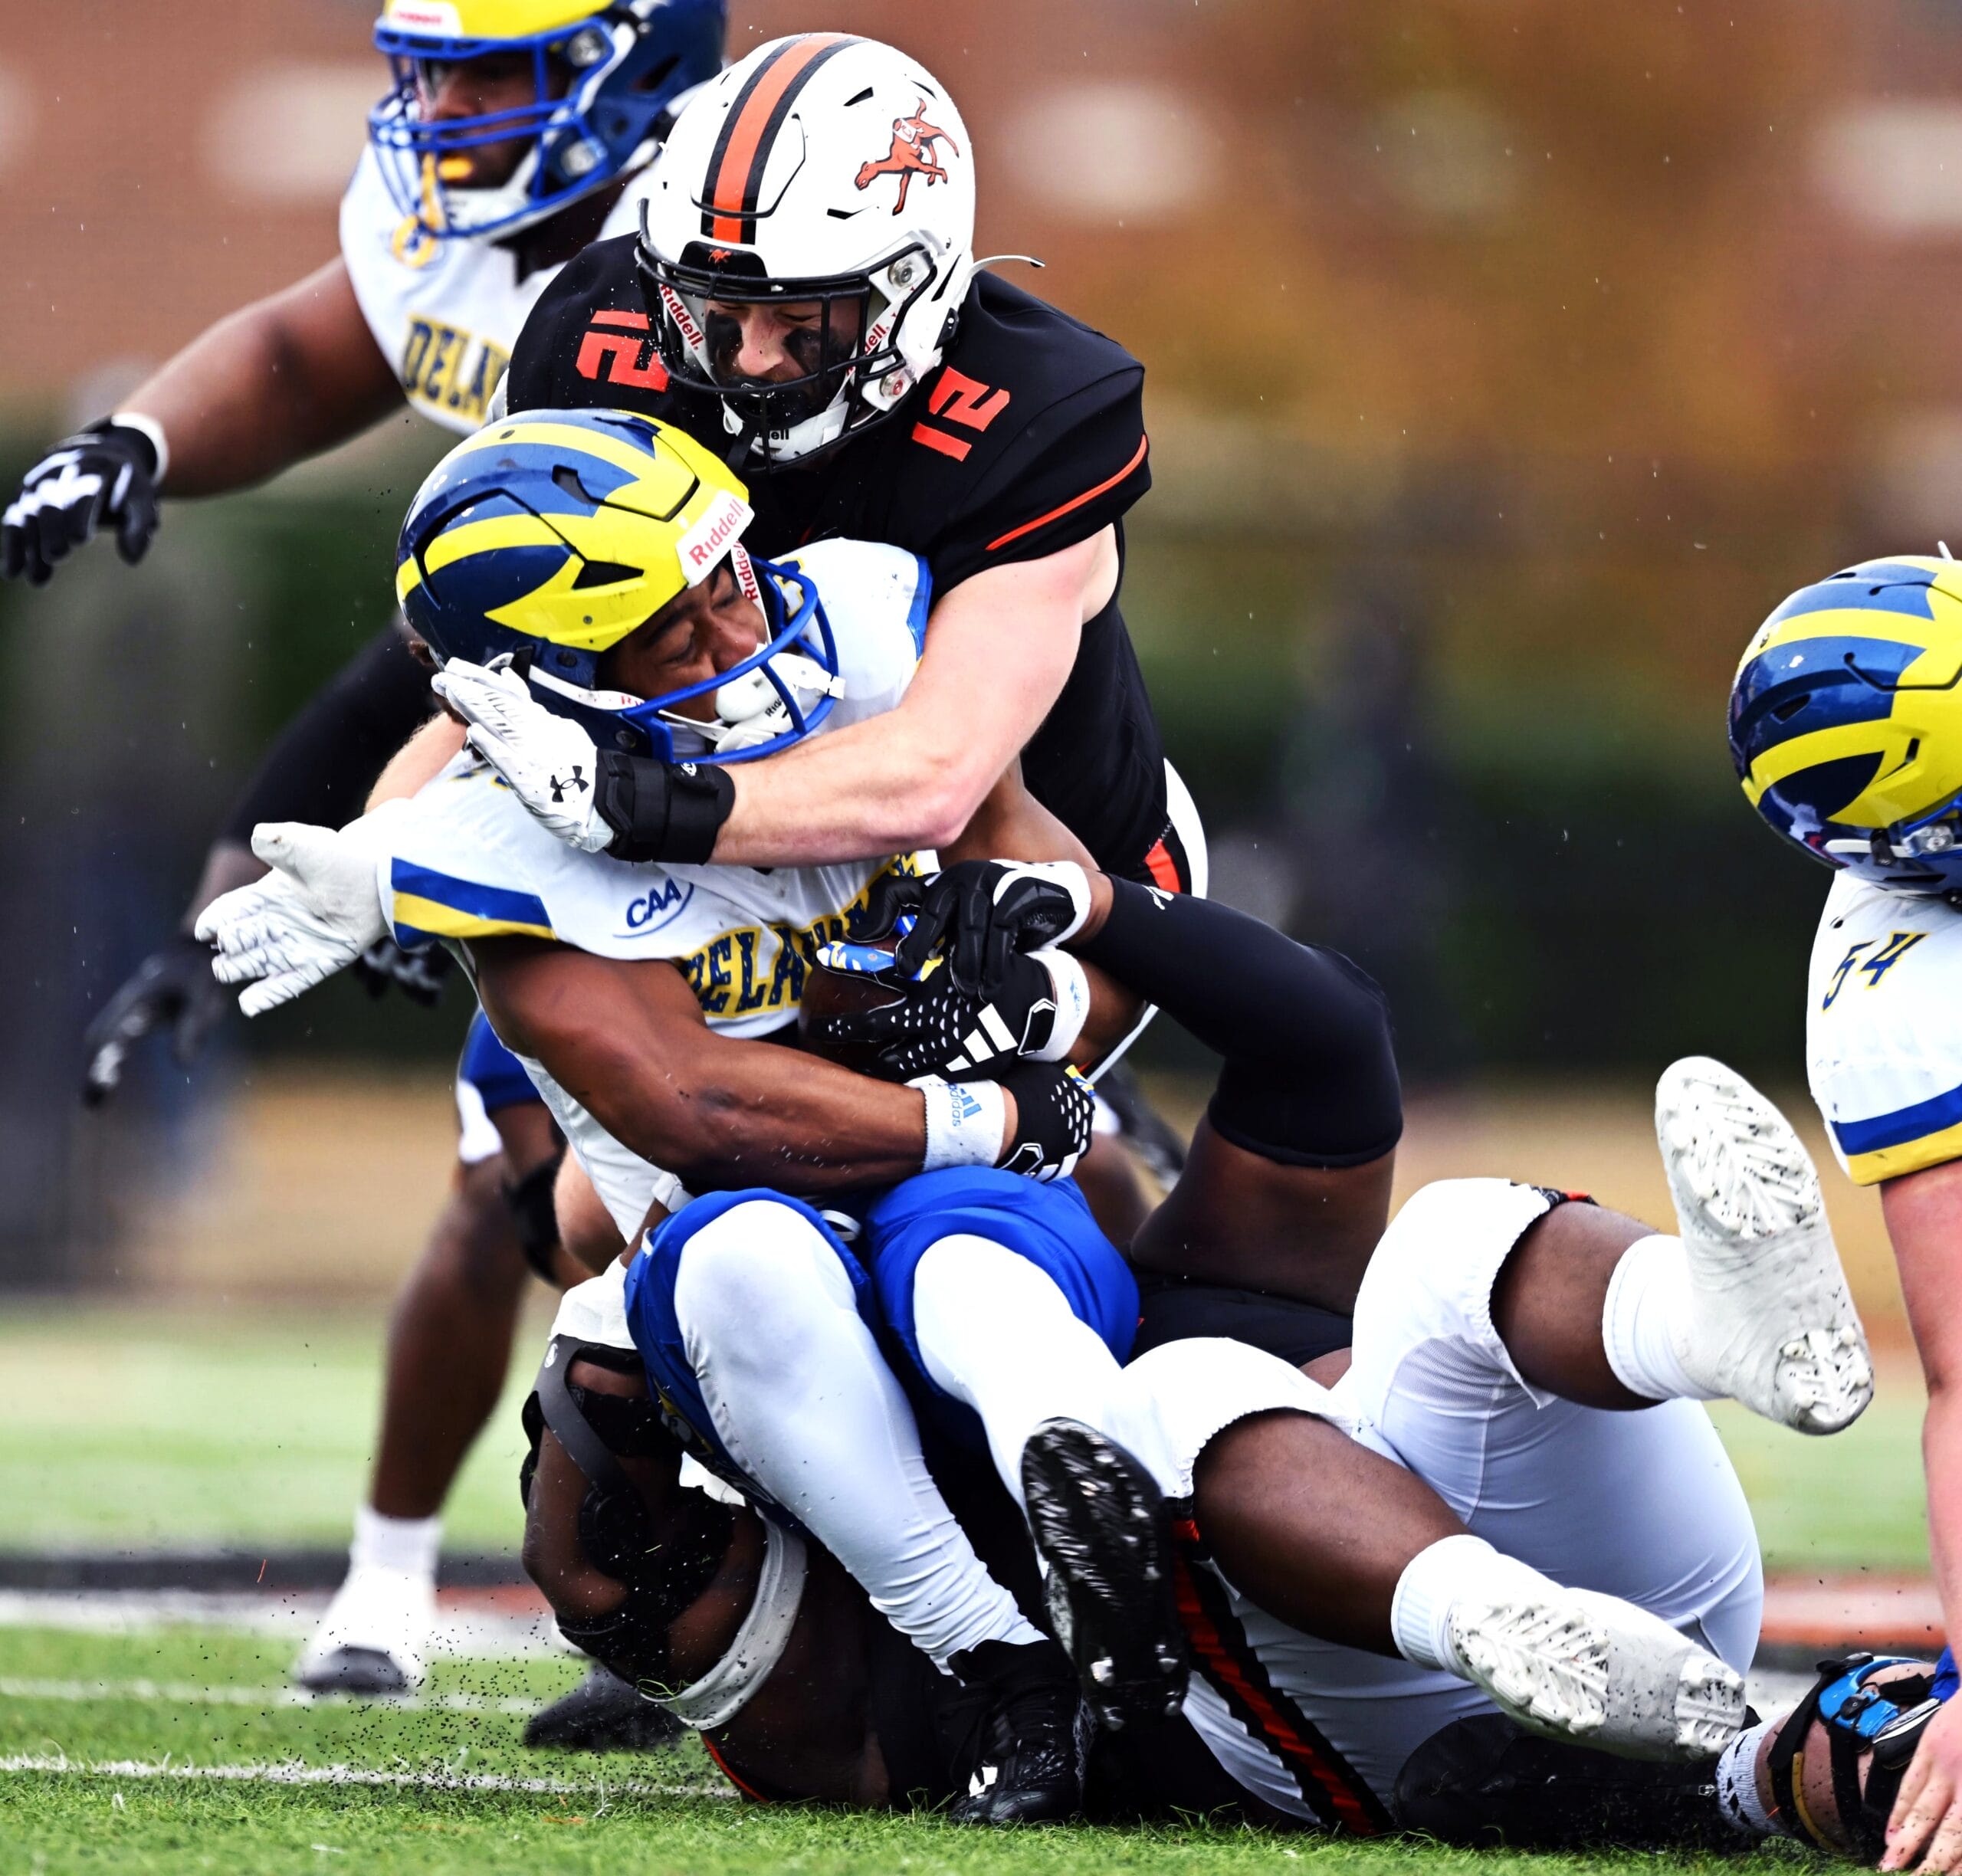 Delaware downs Camels as O’Connor passes for four touchdowns